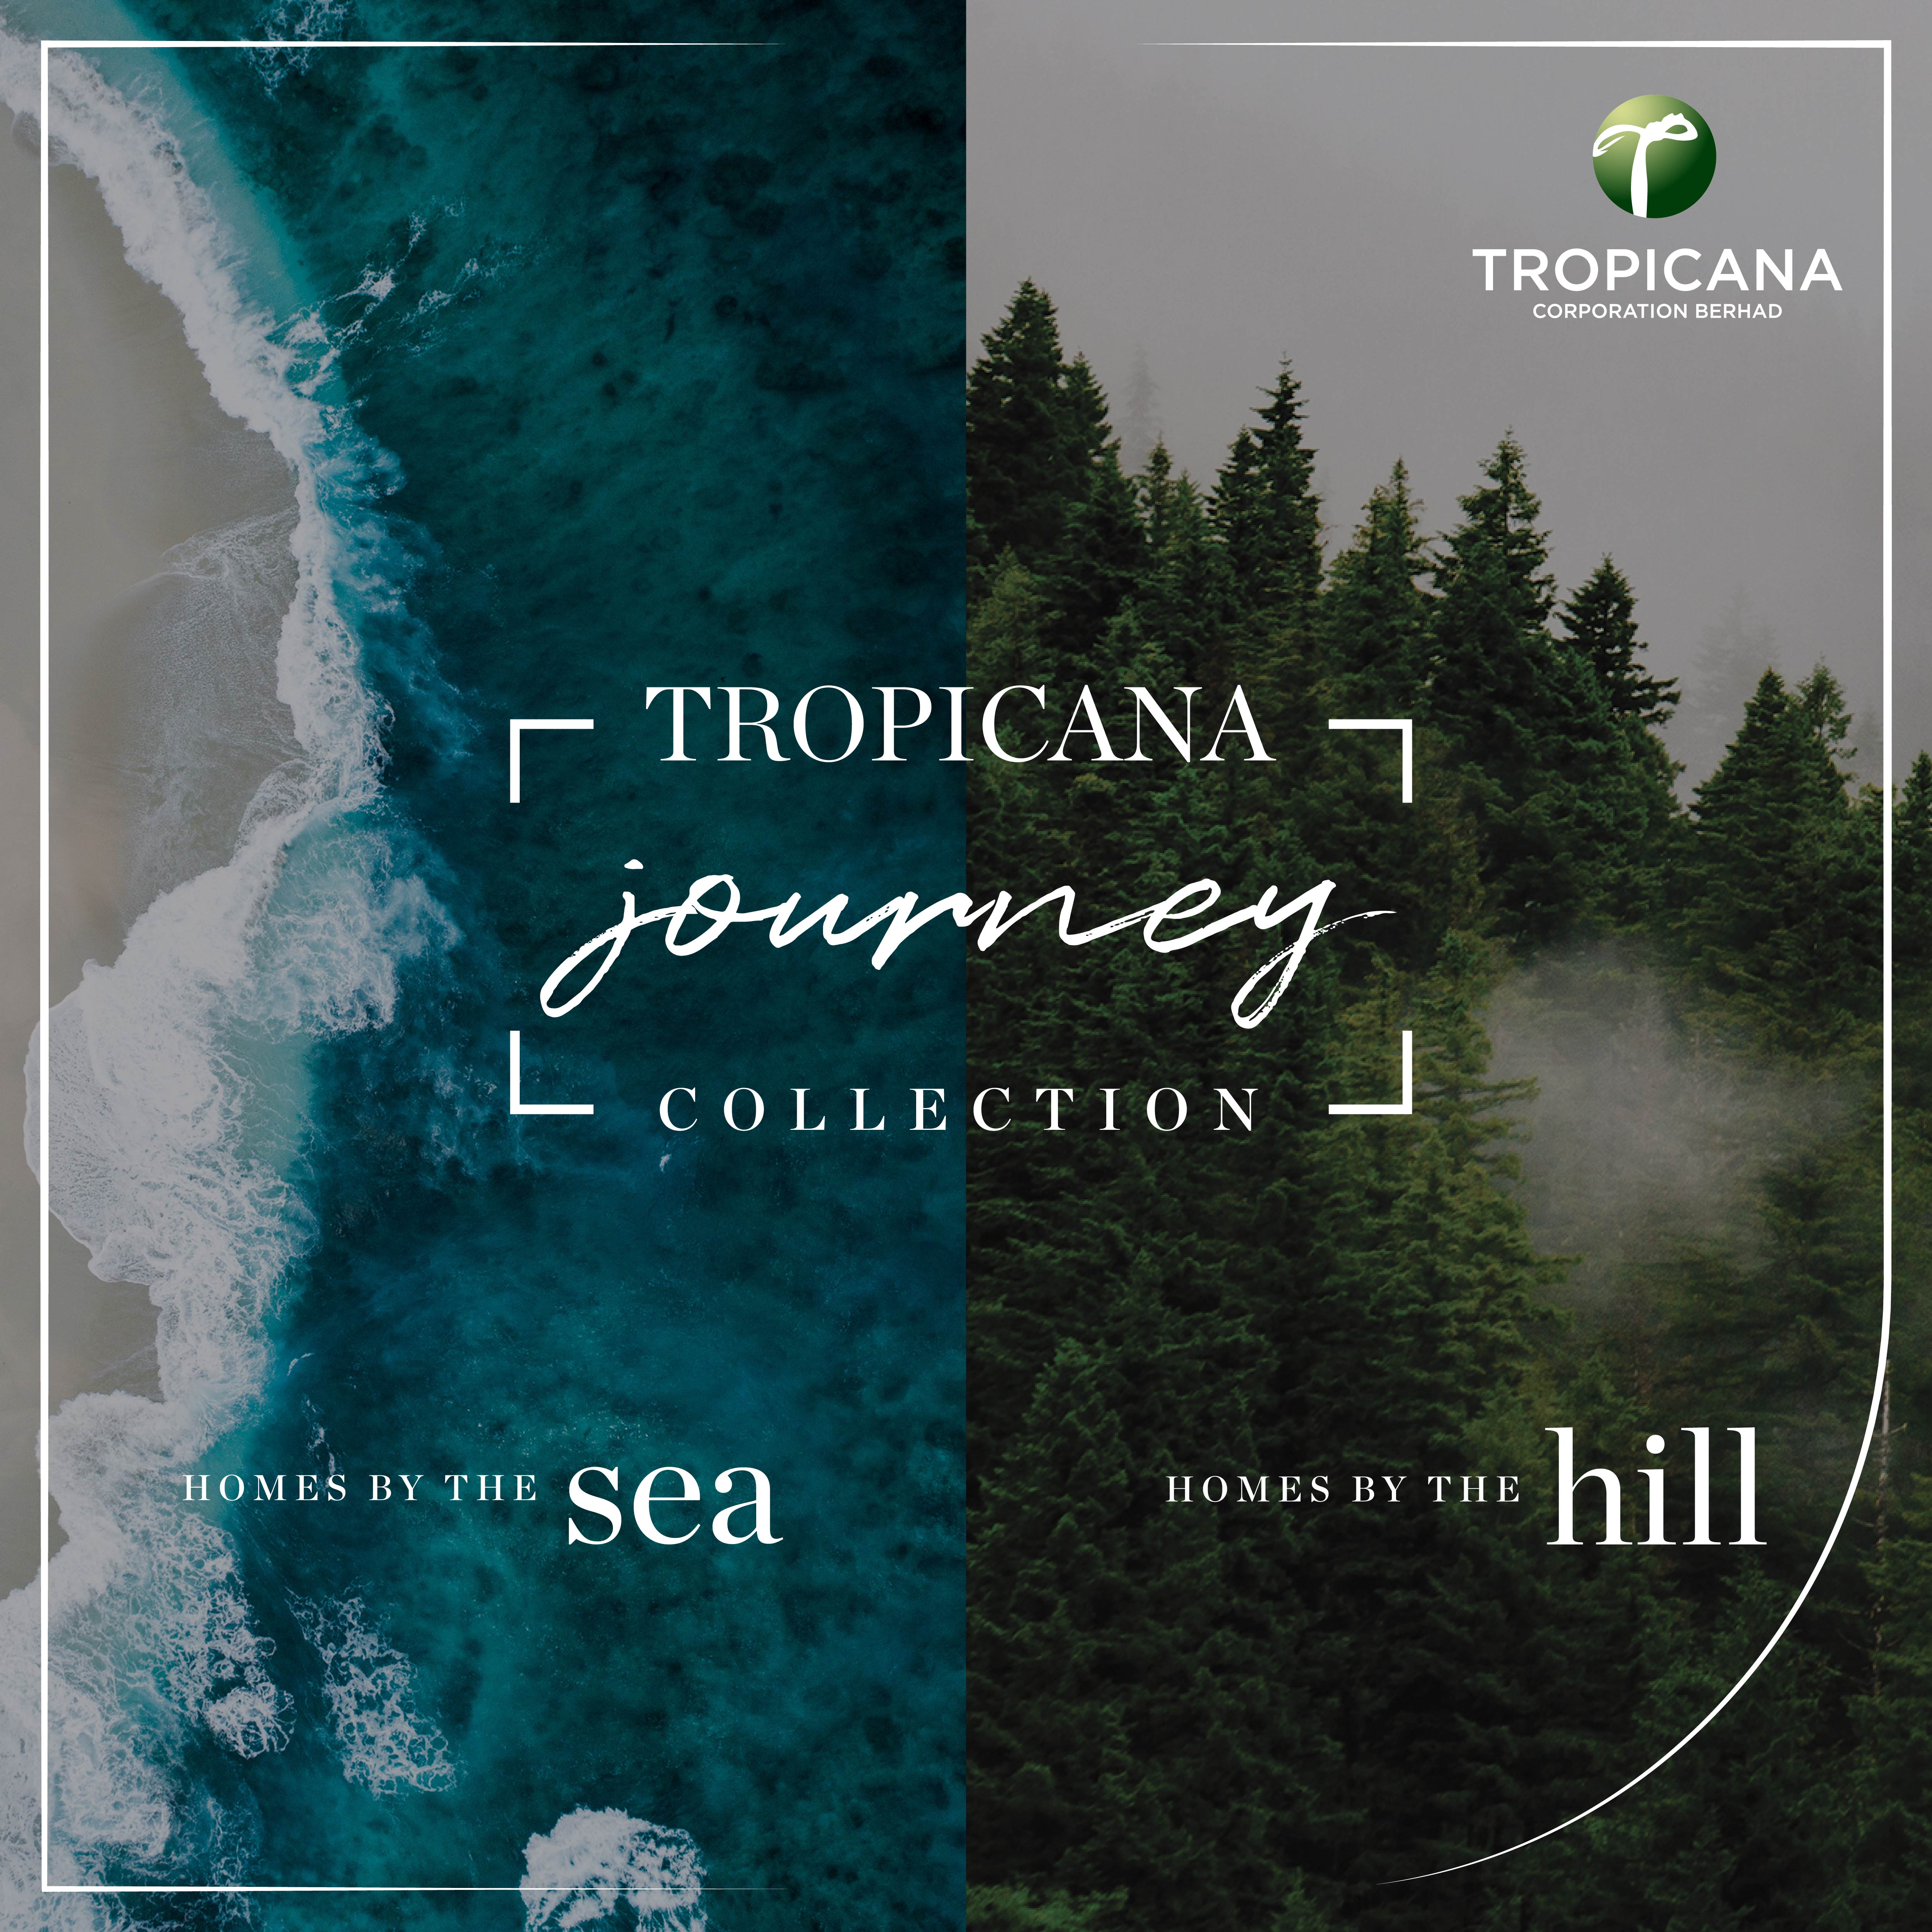 Tropicana Journey Collection